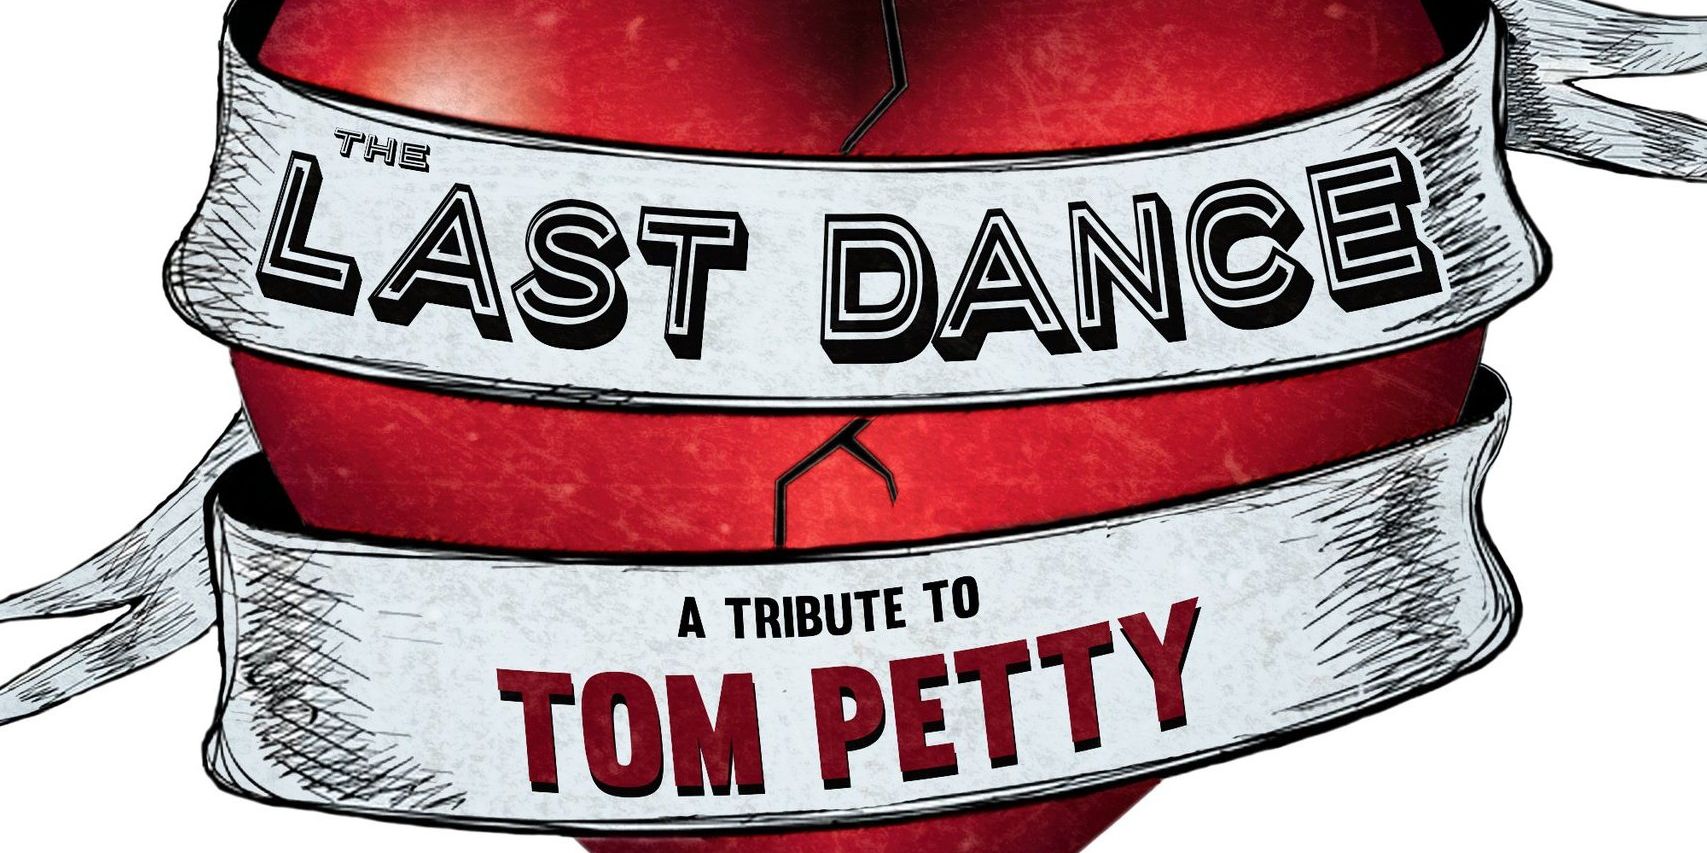 Last Dance - A Tom Petty Tribute promotional image